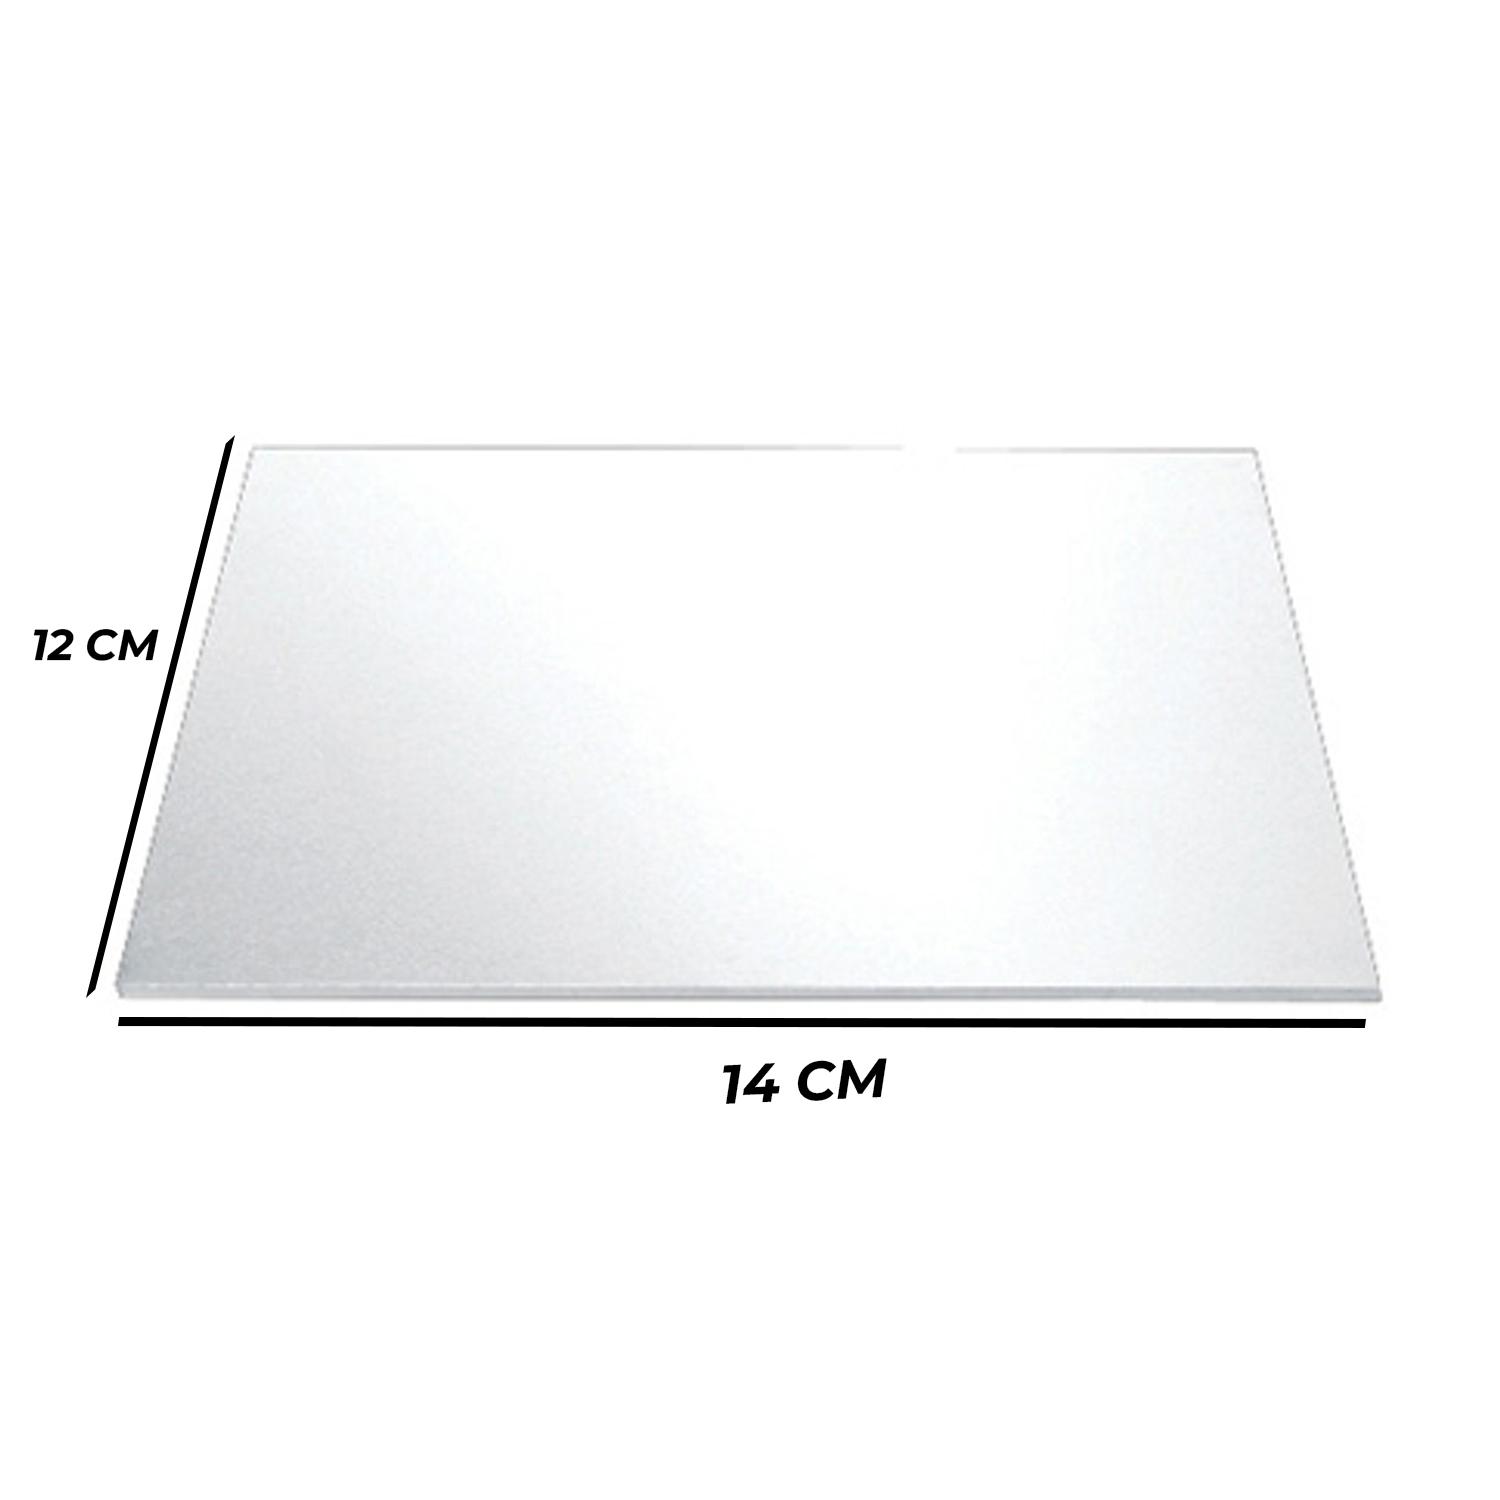 PACK OF 100 - 14'' X 12'' RECTANGLE SILVER CAKE BOARDS